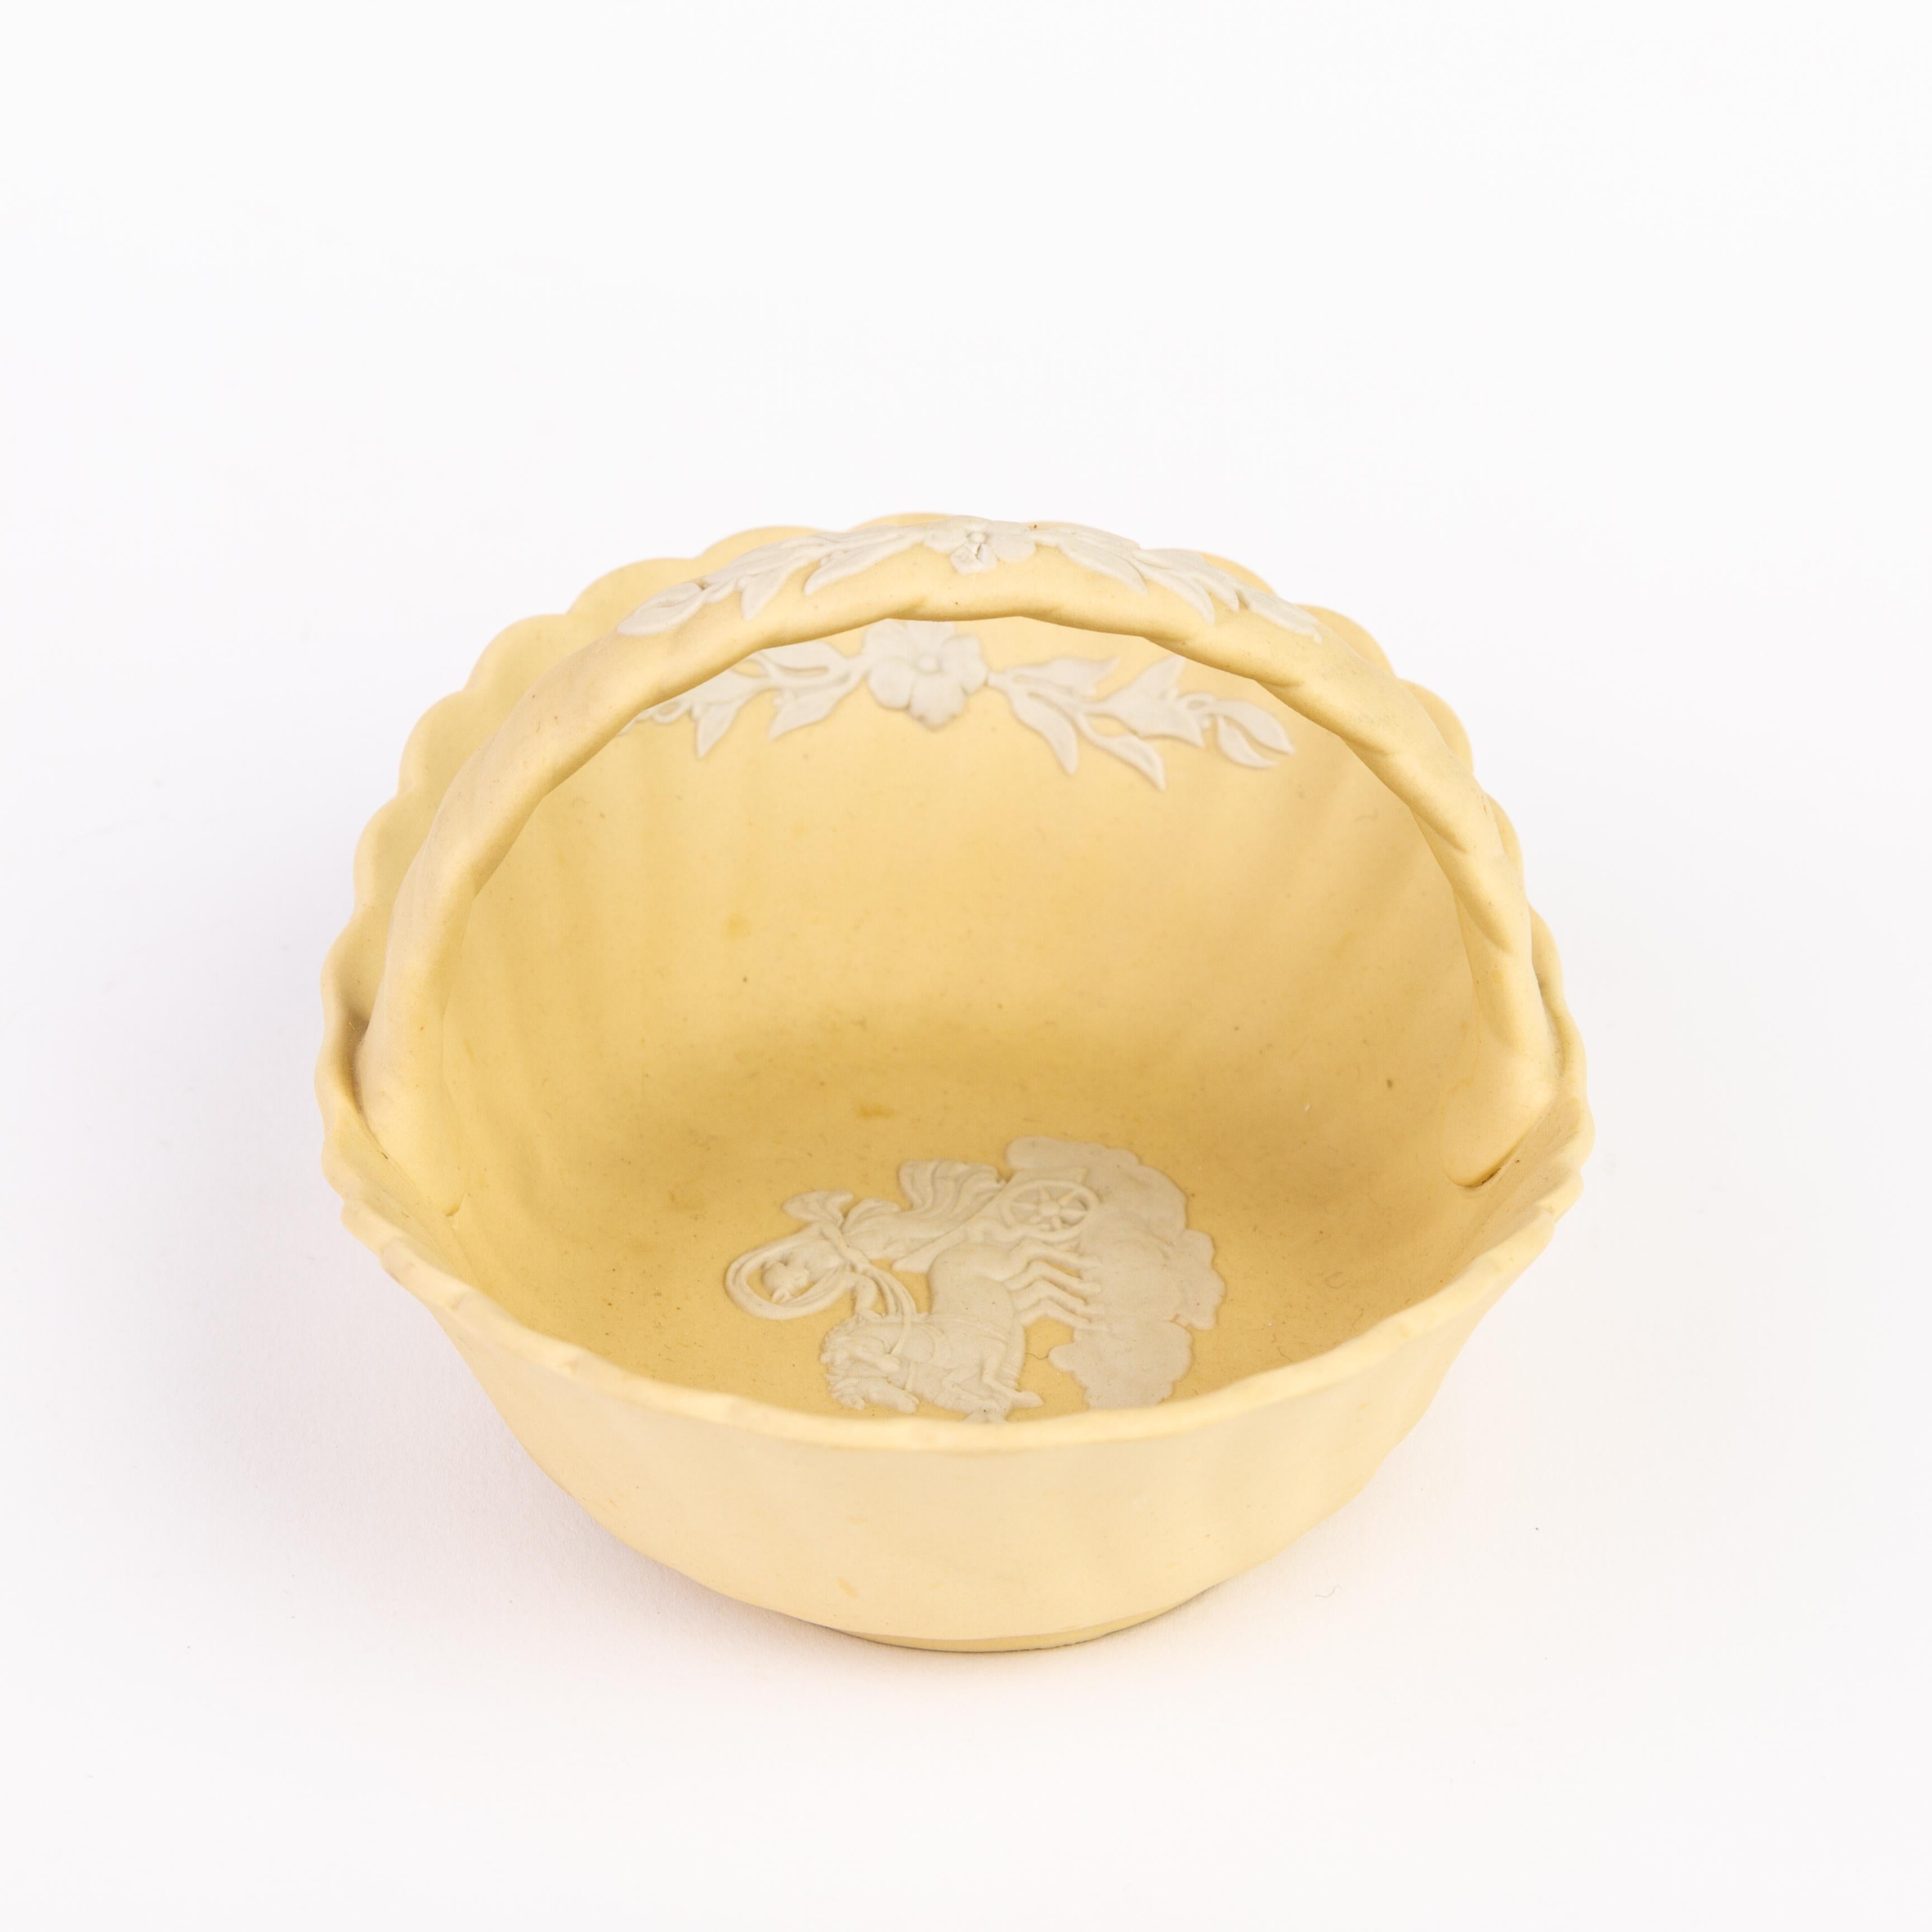 From a private collection.
Free international shipping.
Wedgwood Primrose Yellow Jasperware Basket 